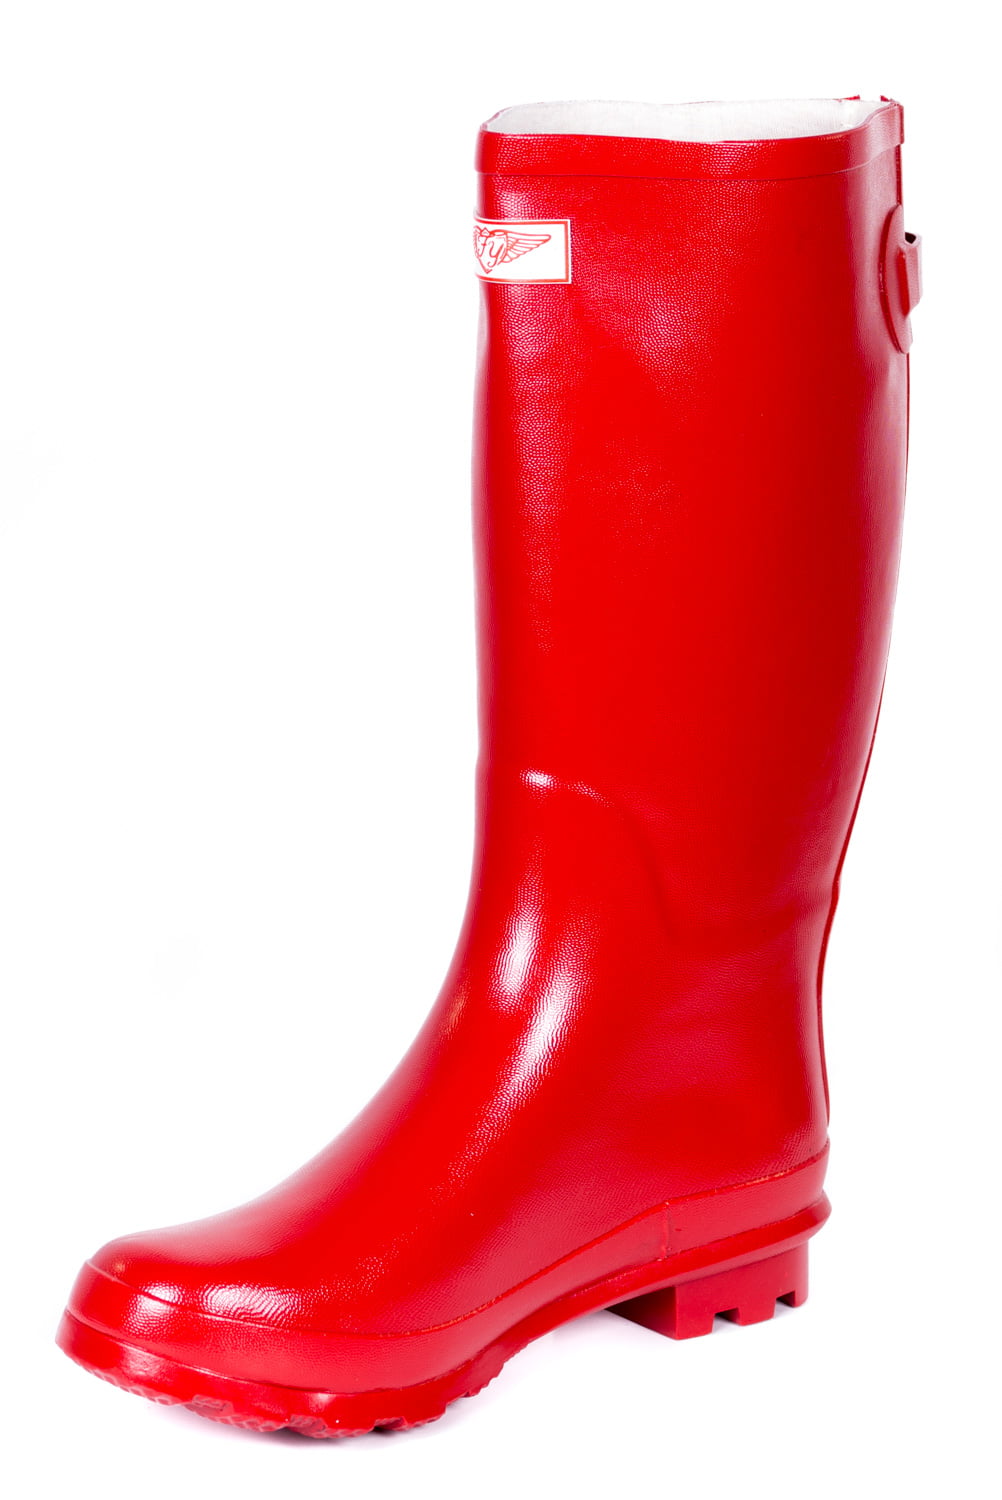 walmart red boots